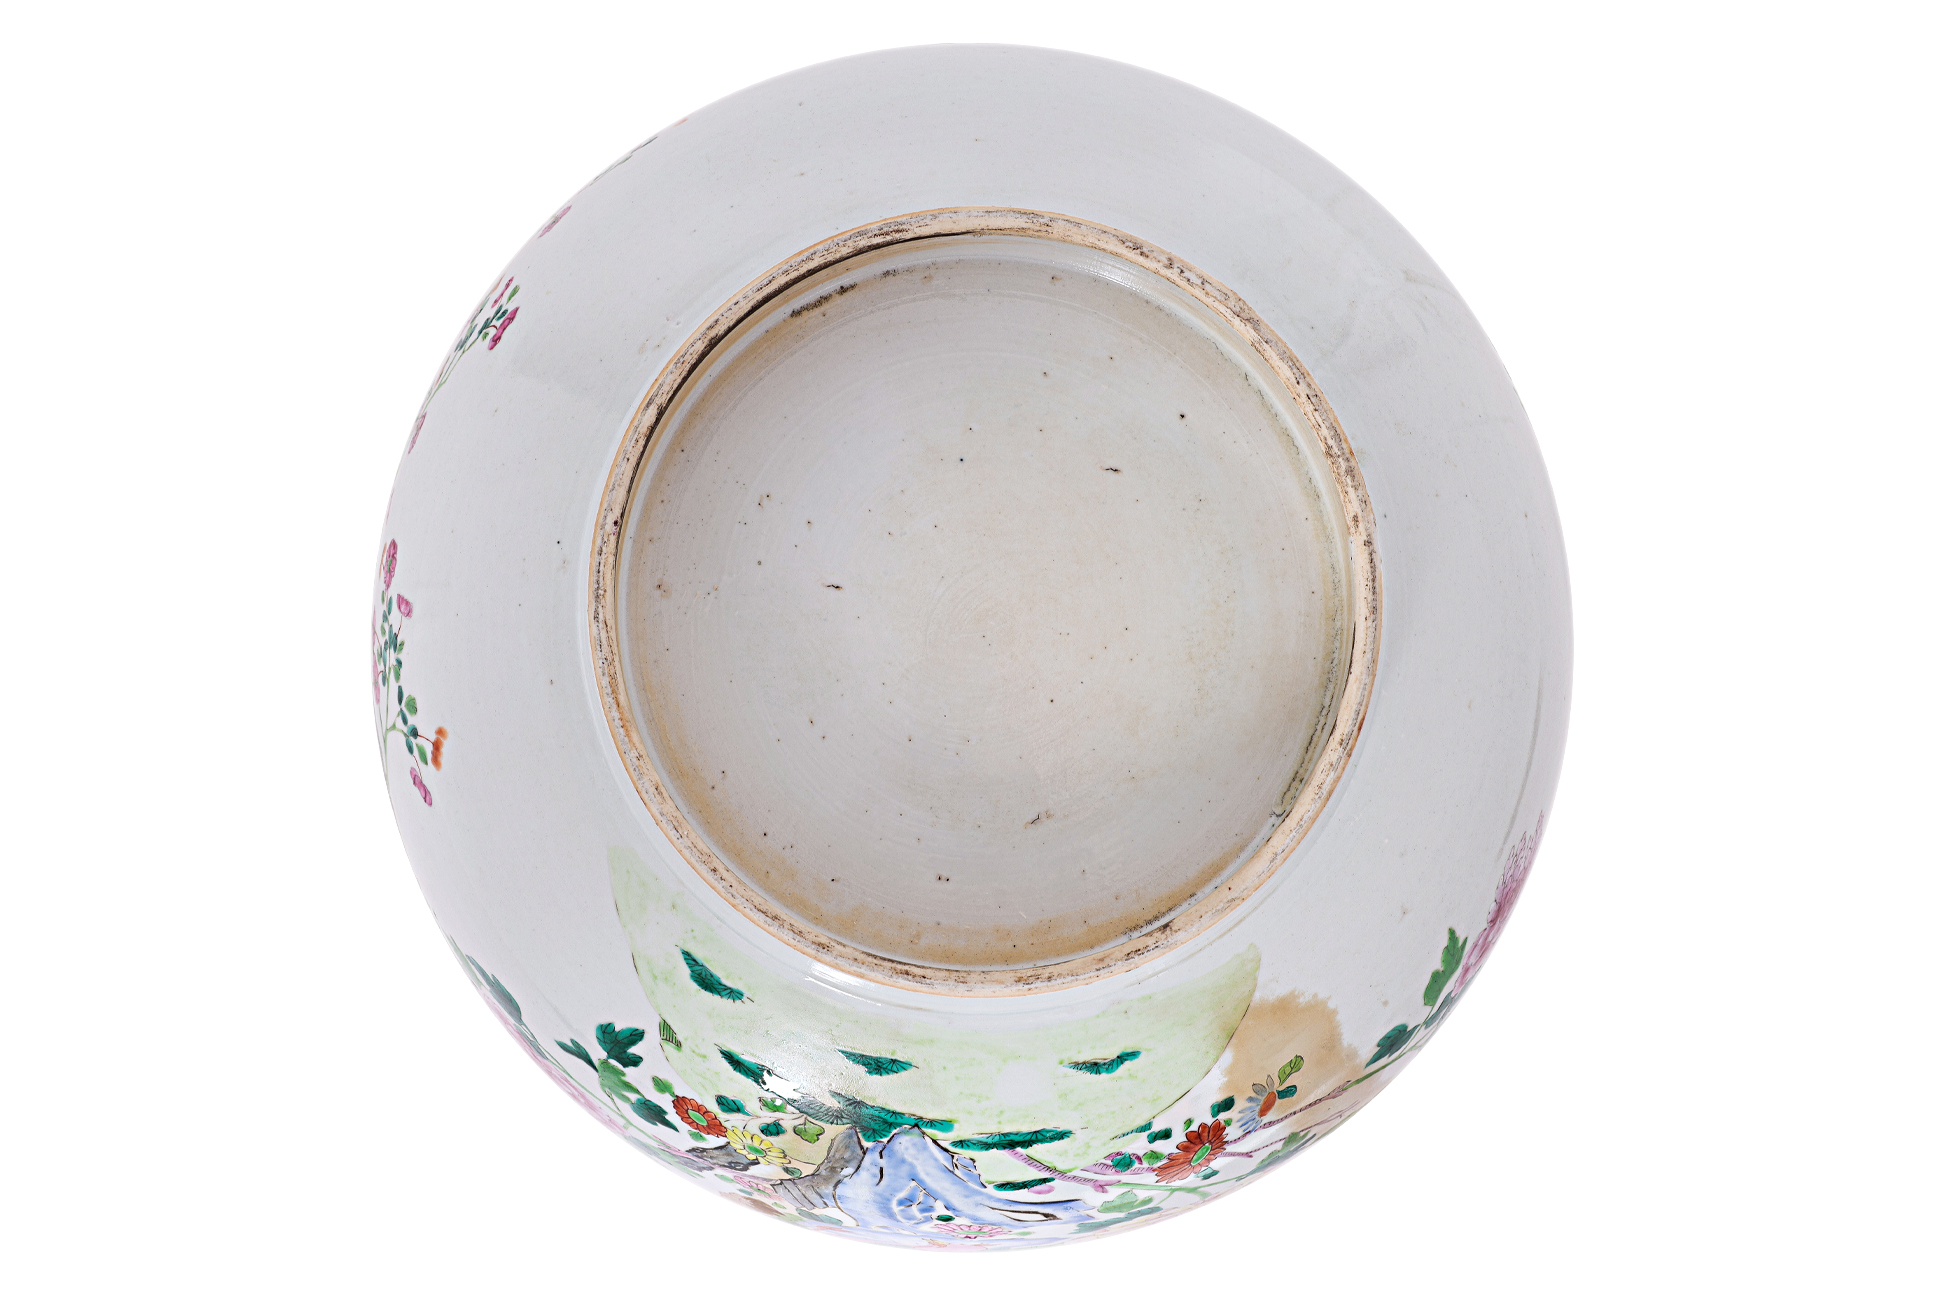 A VERY LARGE CHINESE EXPORT PORCELAIN PUNCH BOWL - Image 3 of 3